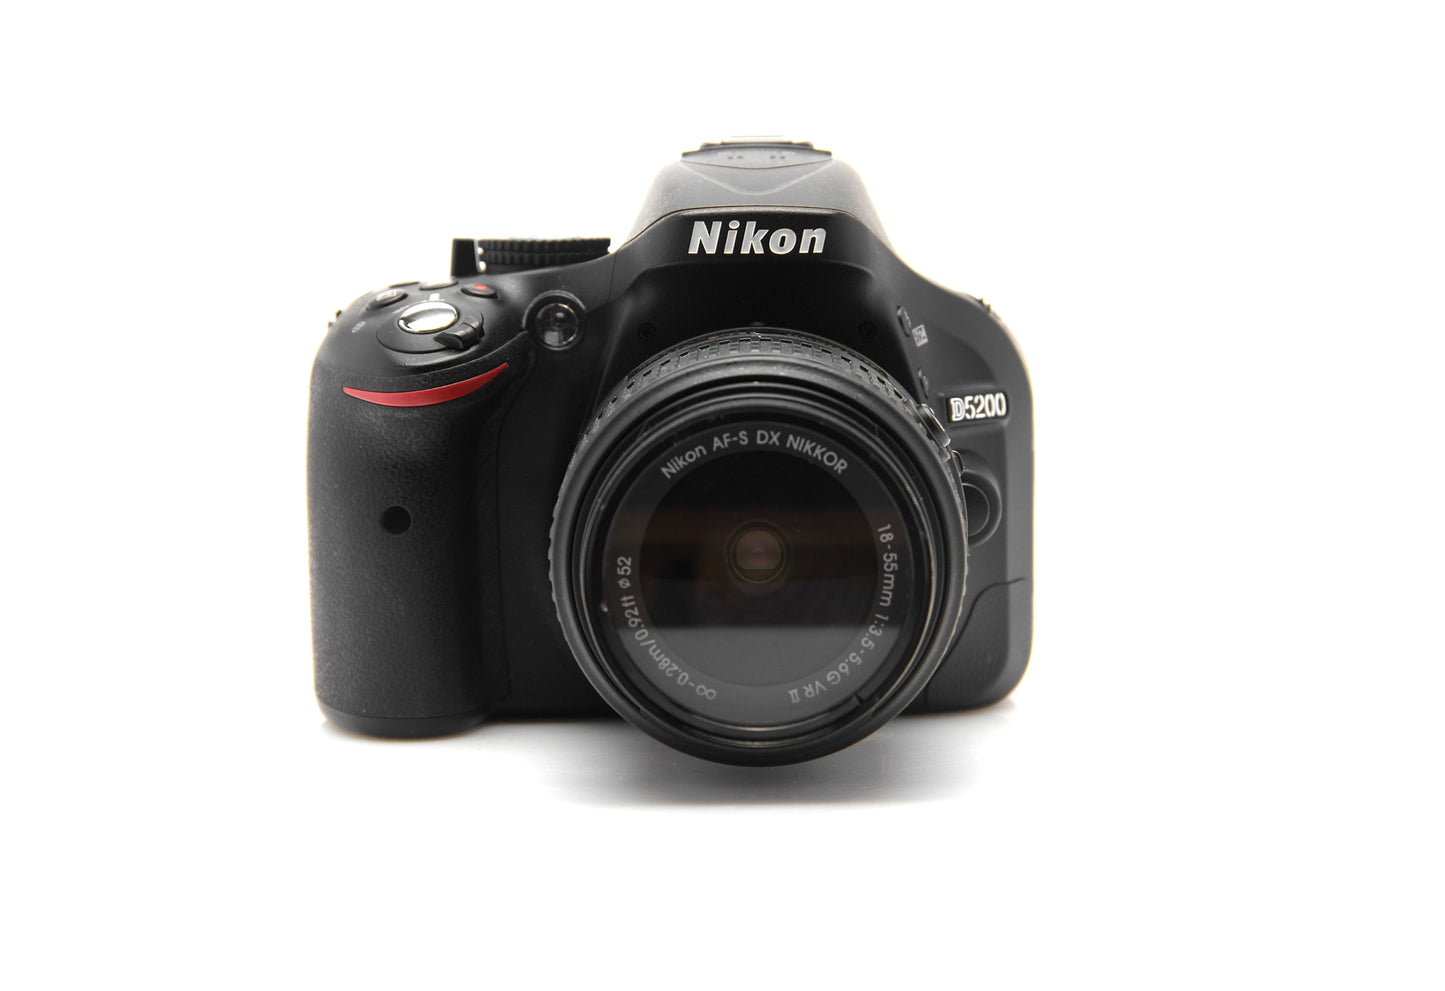 Used Nikon D5200 Camera With 18-55mm Lens